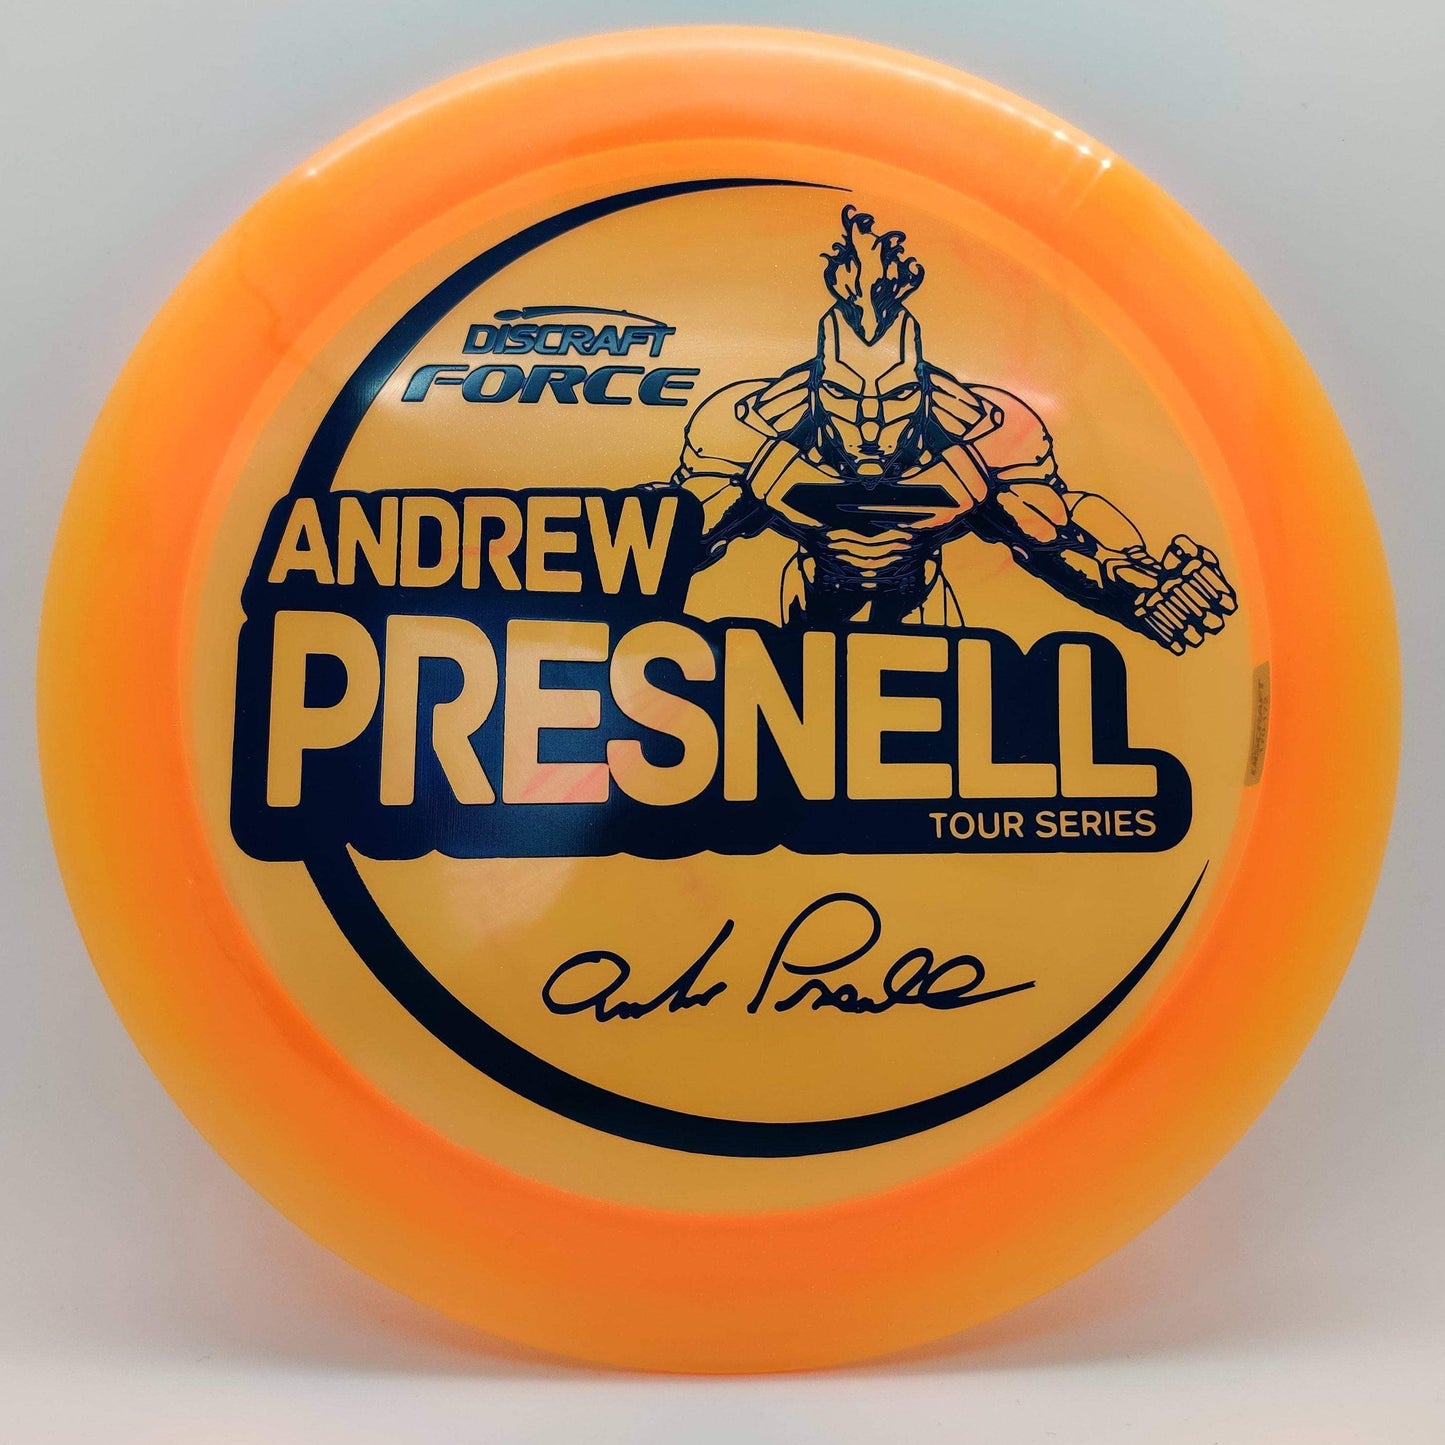 2021 Andrew Presnell Tour Series Force - Disc Golf Deals USA